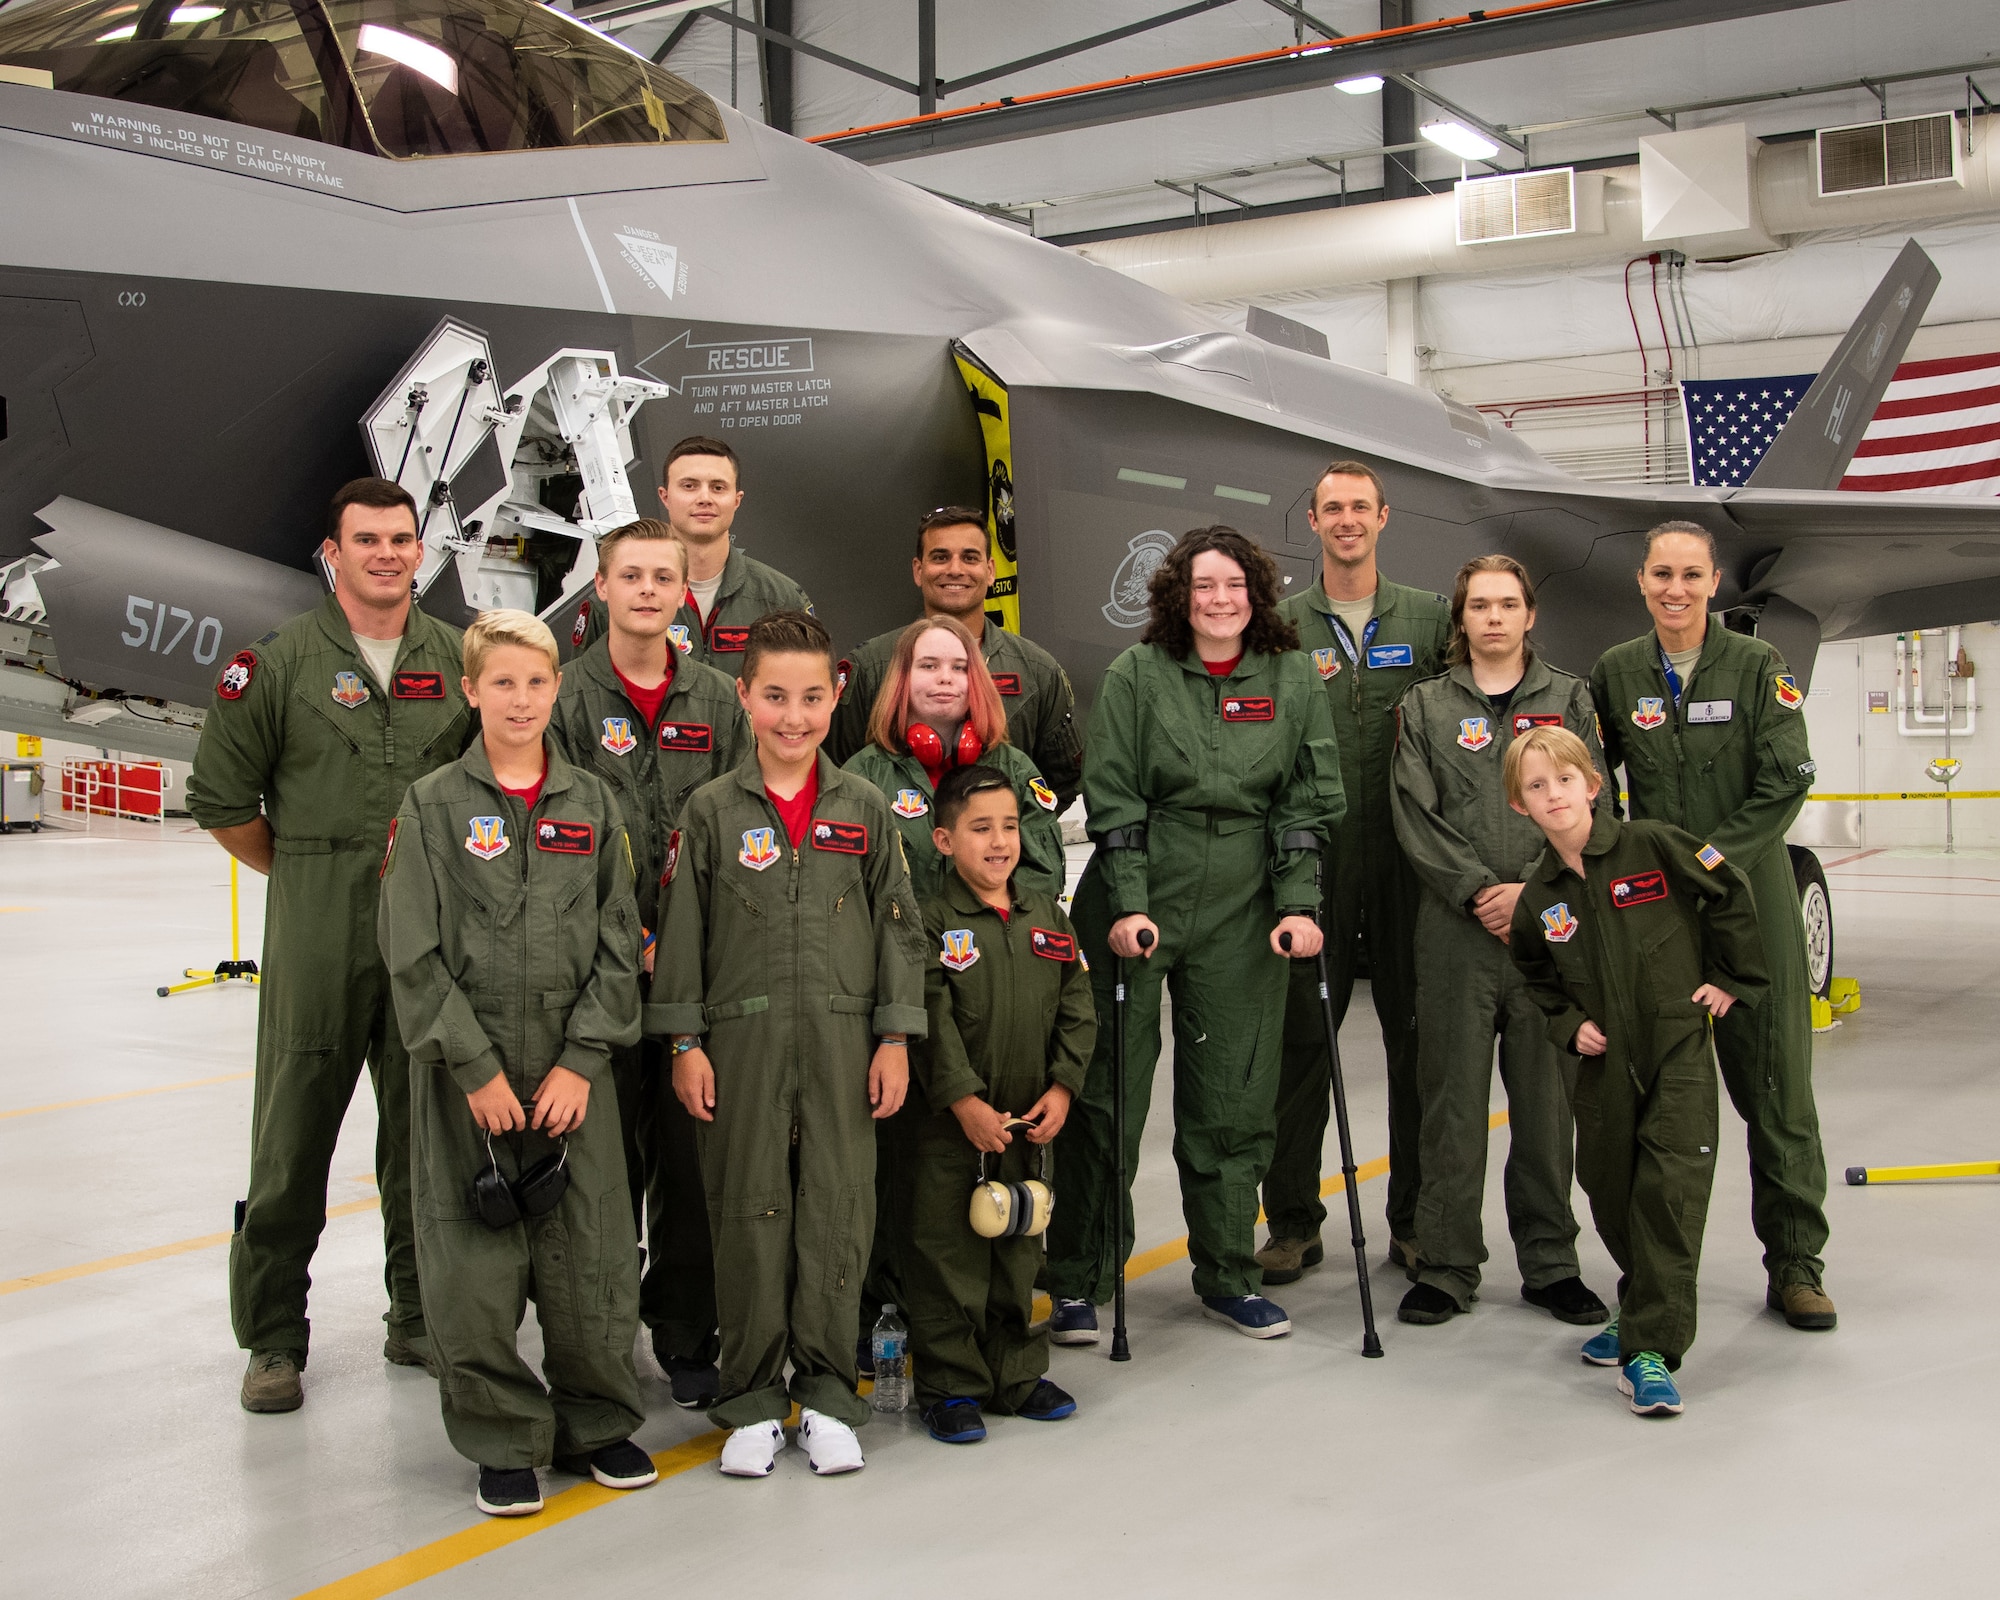 Children from Make-A-Wish Utah pose for a photo with F35A pilots, May 24, 2018, at Hill Air Force Base, Utah. Eight children and their parents from the Make-A-Wish visited Hill for the "Pilot for a Day" program. The children toured the base, visited with pilots and "flew" in an F-35A cockpit trainer during the event. (U.S. Air Force photo by R. Nial Bradshaw)